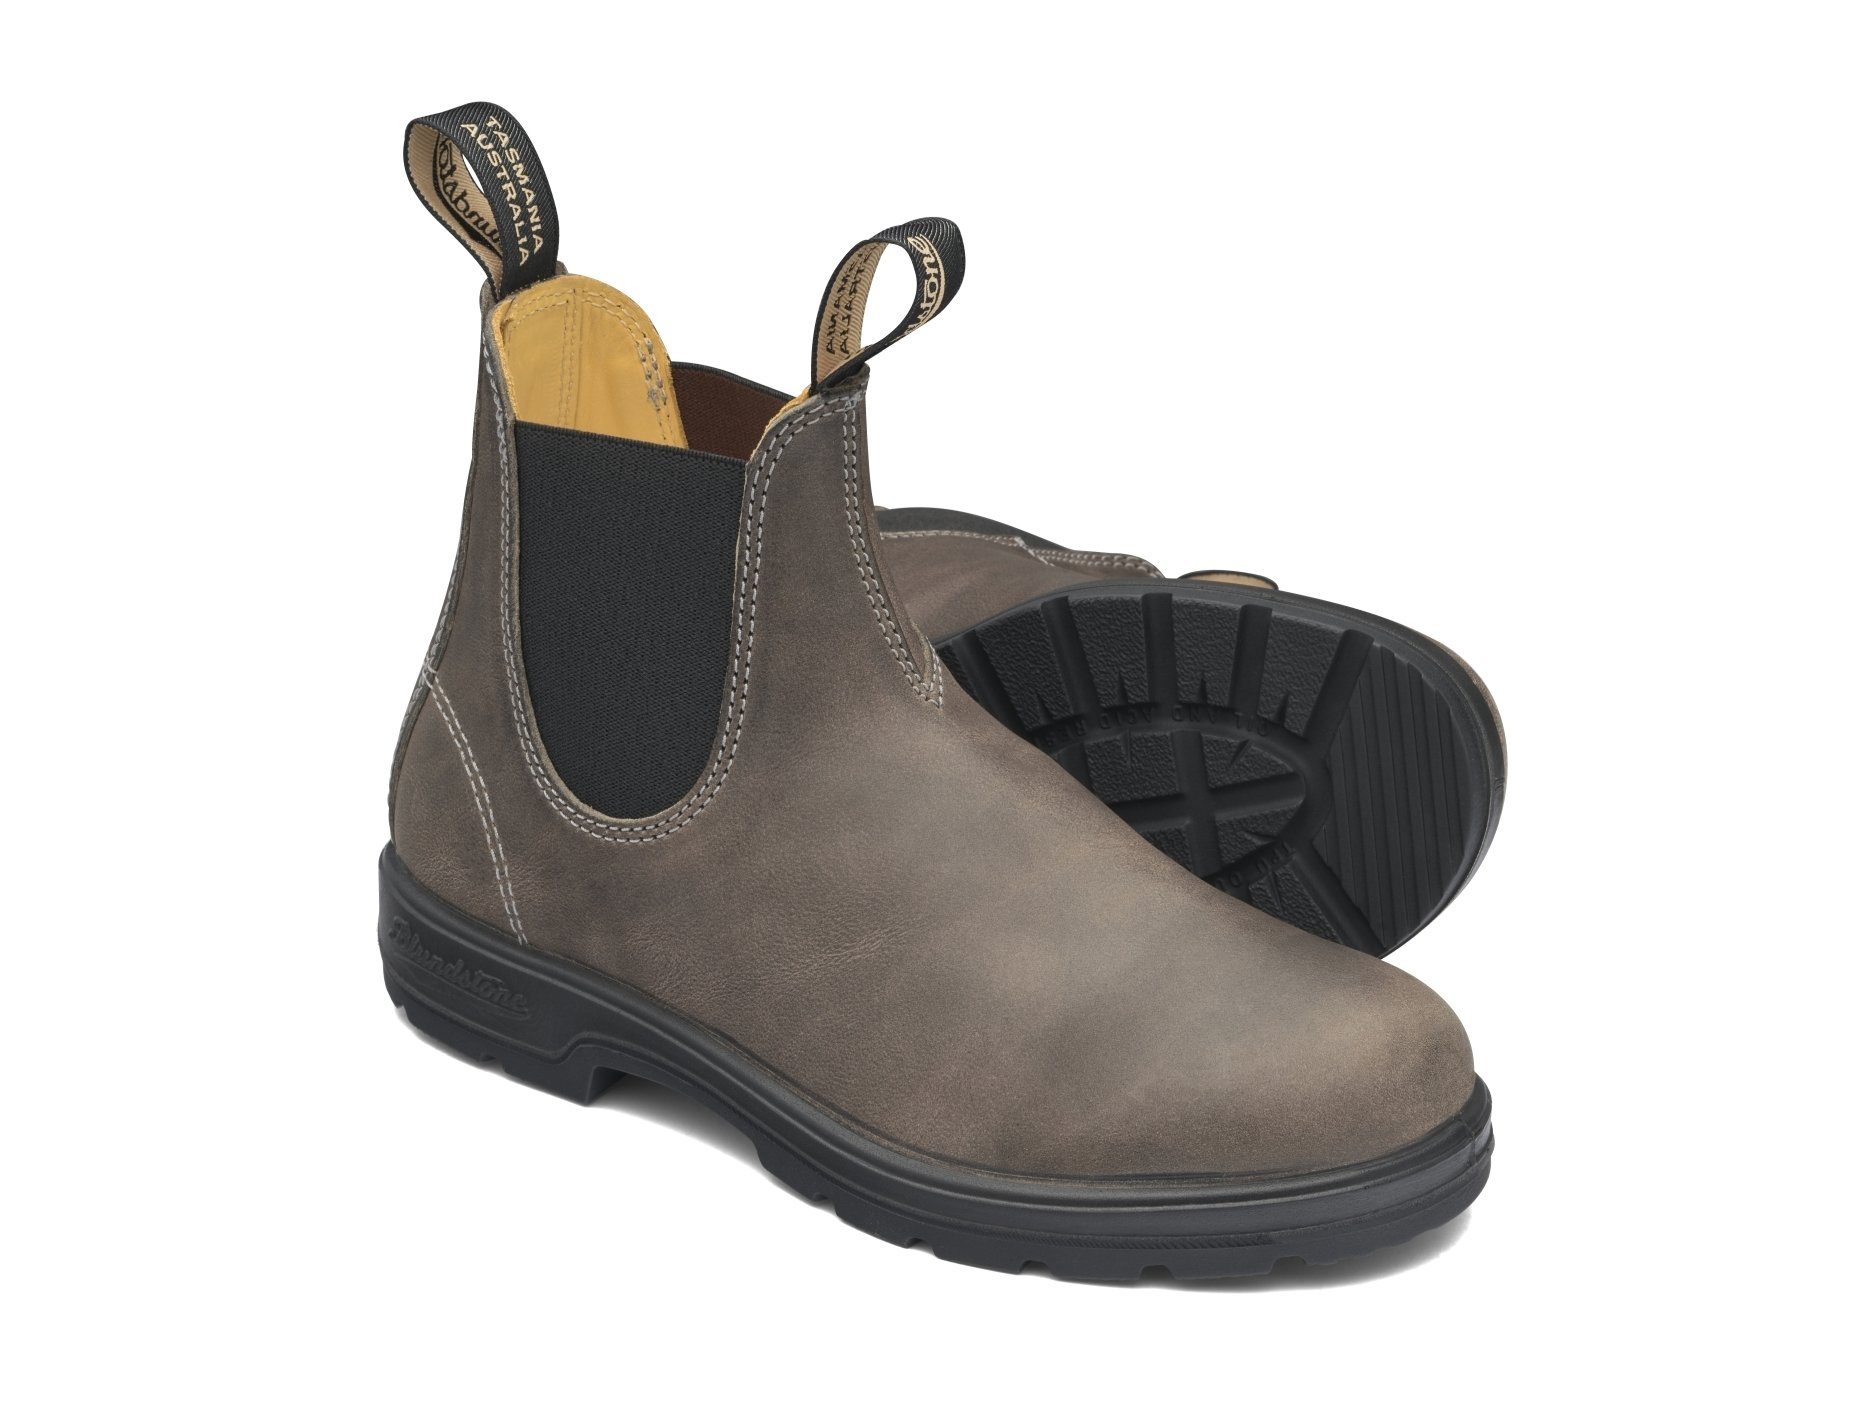 Chelseaboots Blundstone